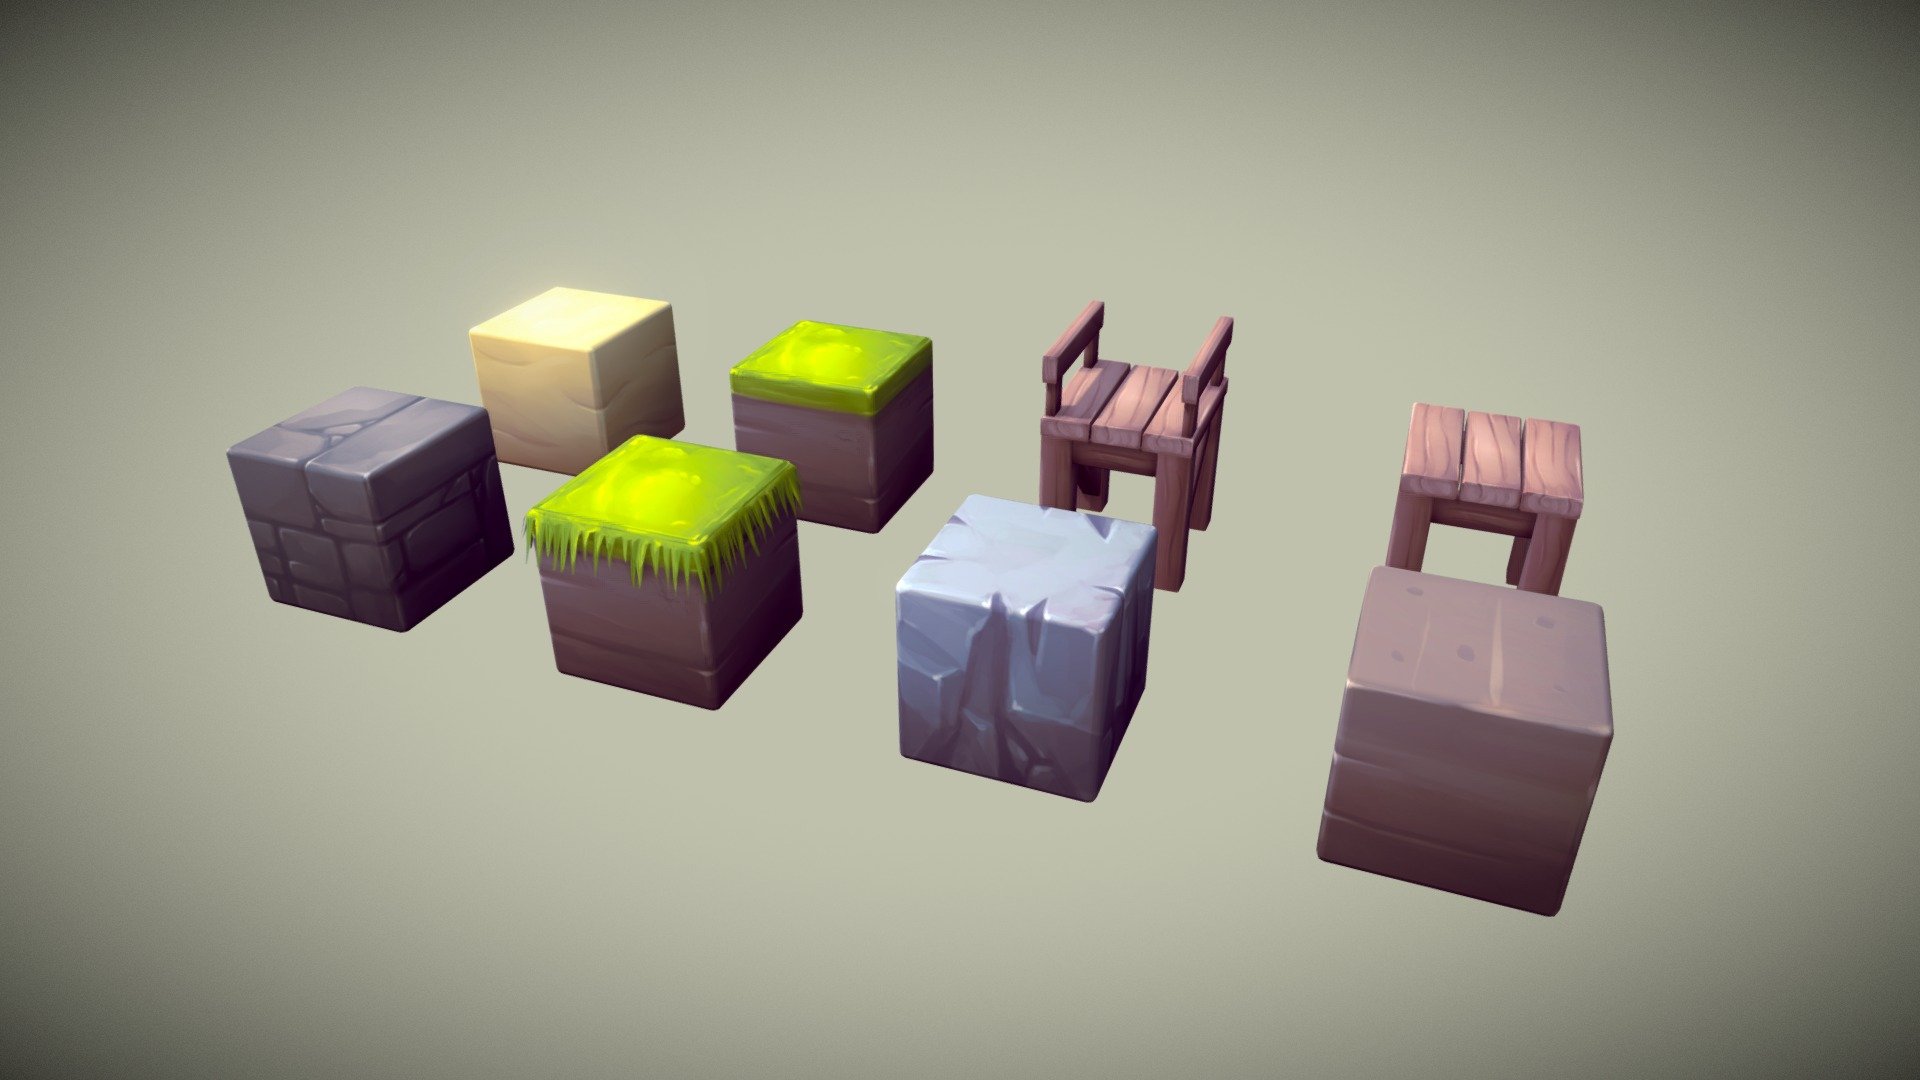 Terrain cubes from upcoming asset store pack: Cube World
This will be a grid based, modular environment building kit 3d model